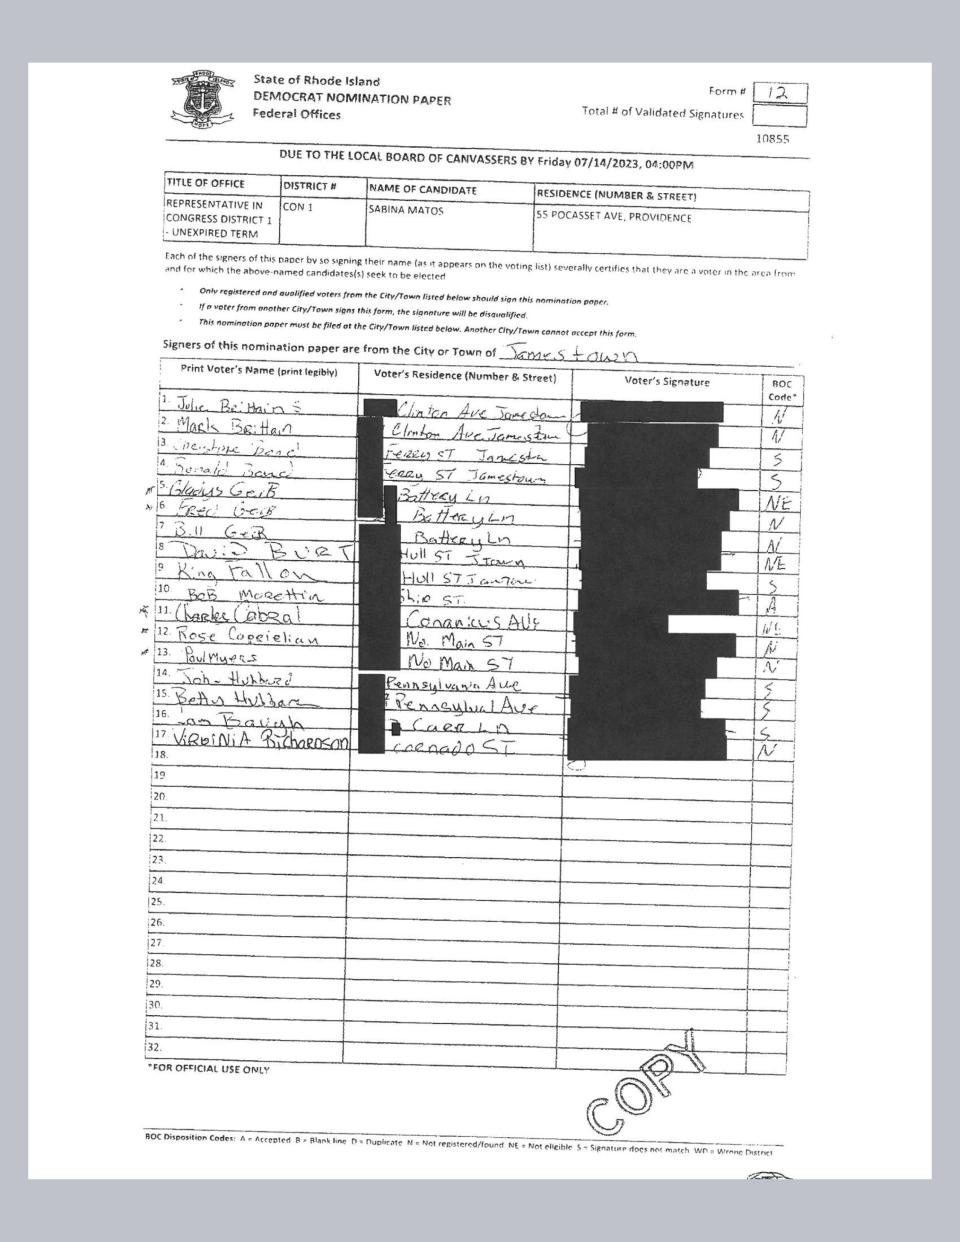 A page from the nomination papers turned in to Jamestown by the campaign of Sabina Matos. Jamestown Town Clerk Roberta J. Fagan blacked out portions of the public records, citing privacy concerns.